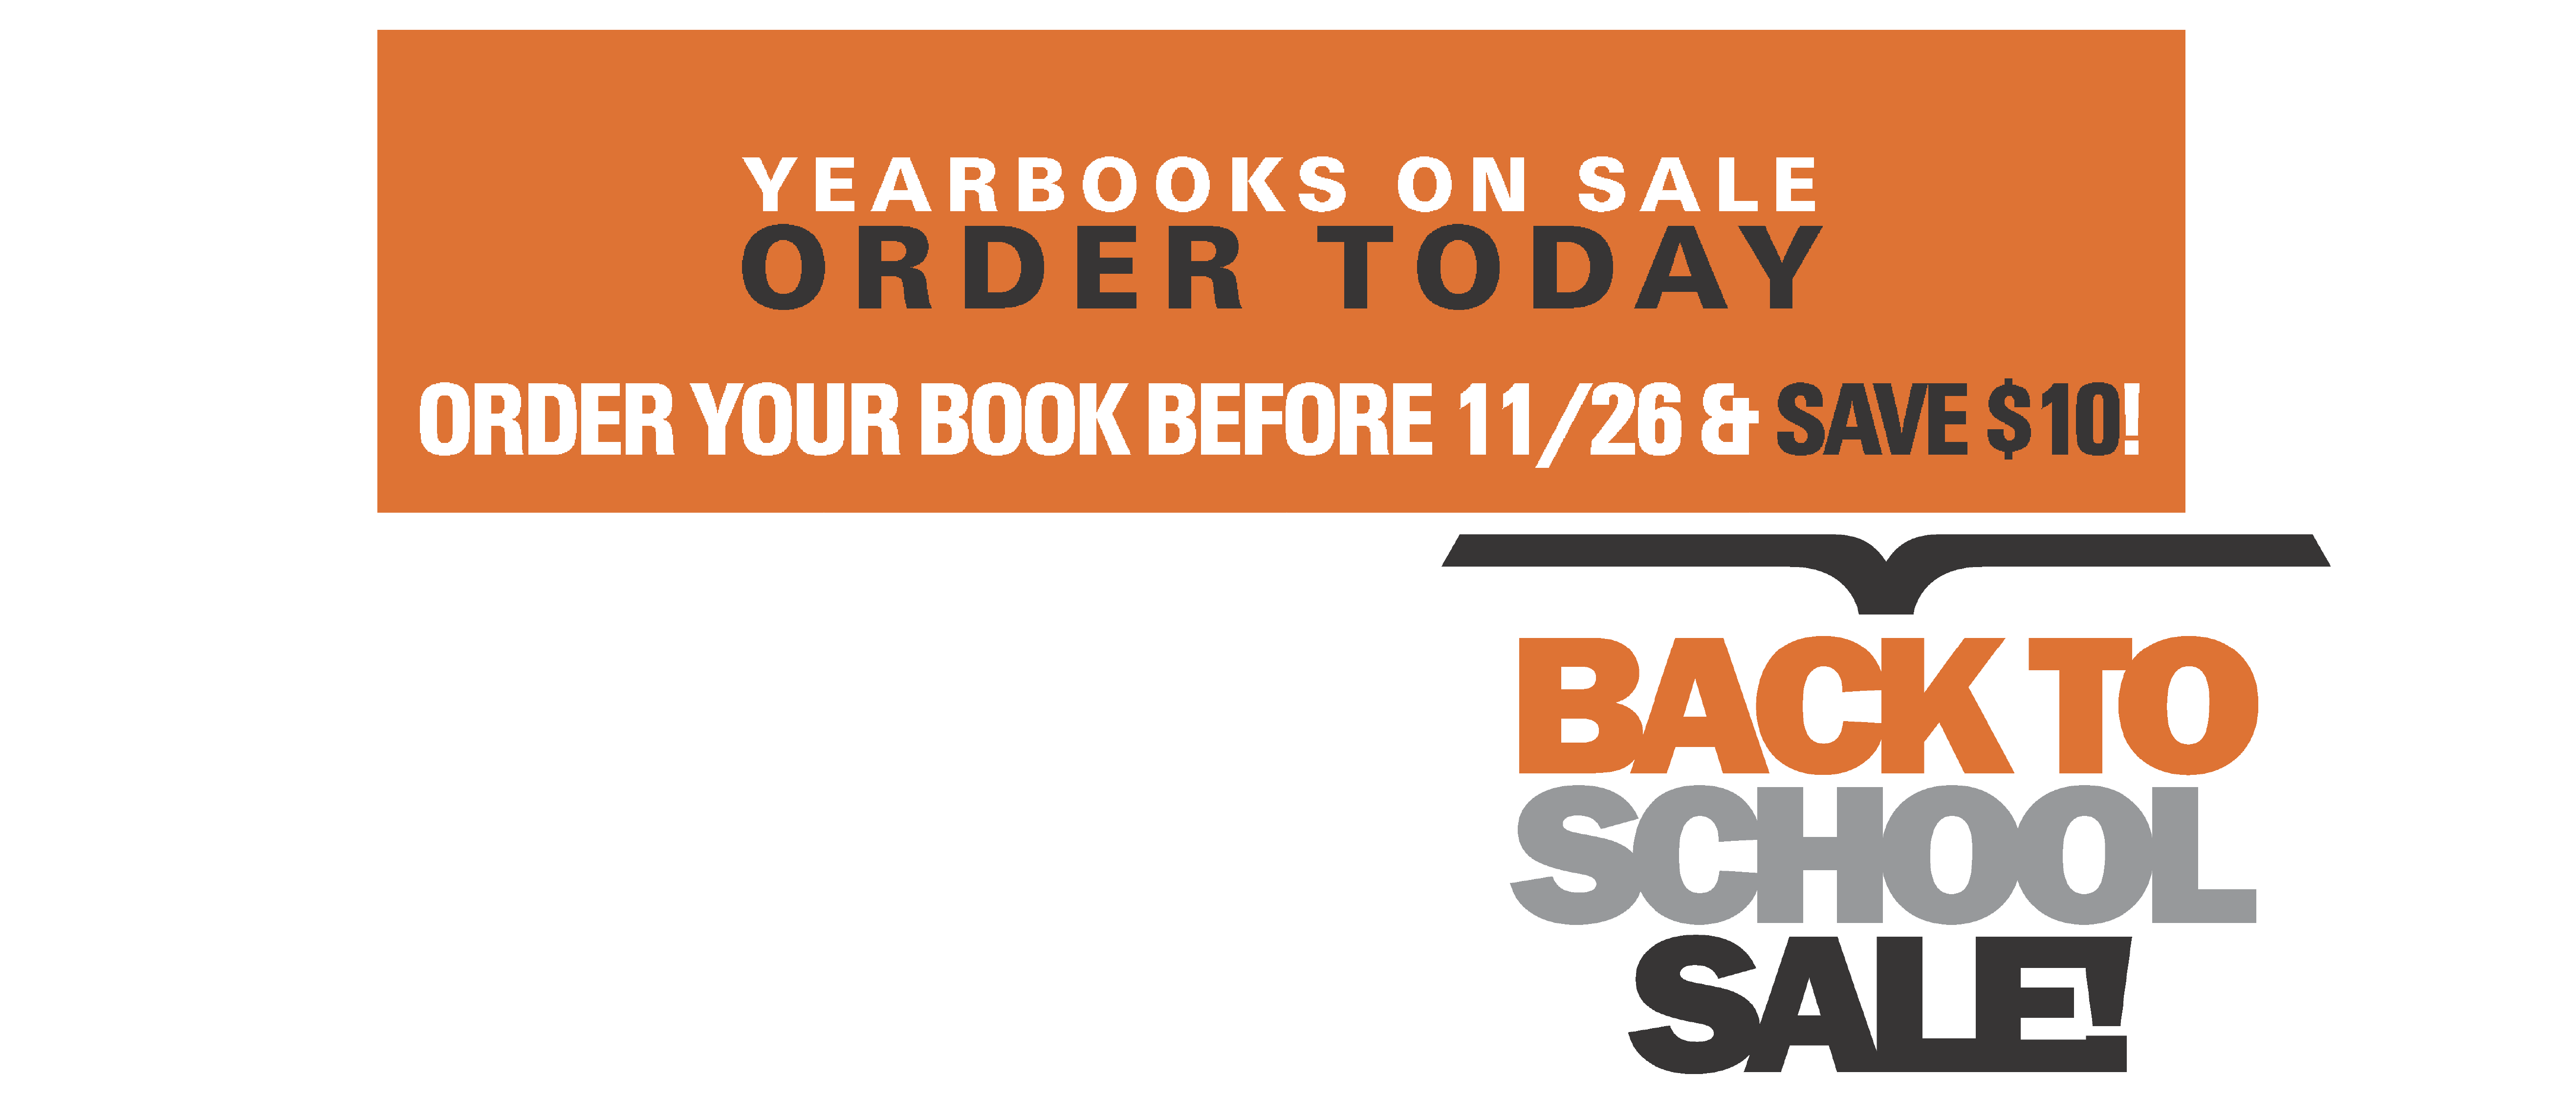 Yearbook banner ad.  Text reads "Yearbook on sale, order today. Order your book before Nov. 26th and save $10! Back to school sale!"